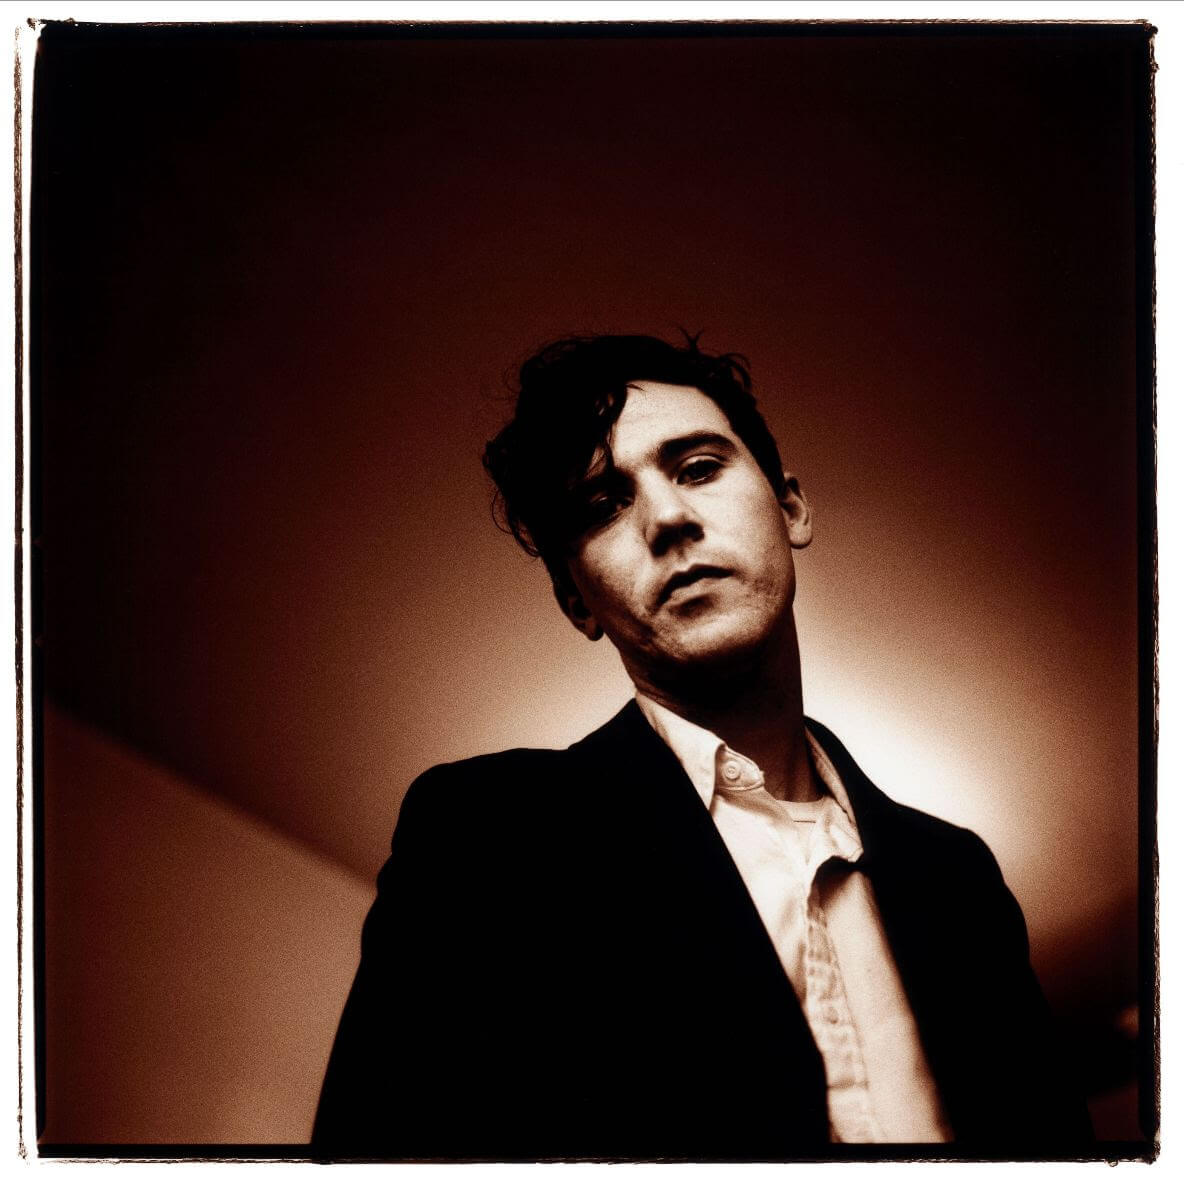 Cass McCombs announces the reissue of his EP Not The Way, and first two albums A and PREfection, available September 6th via 4AD